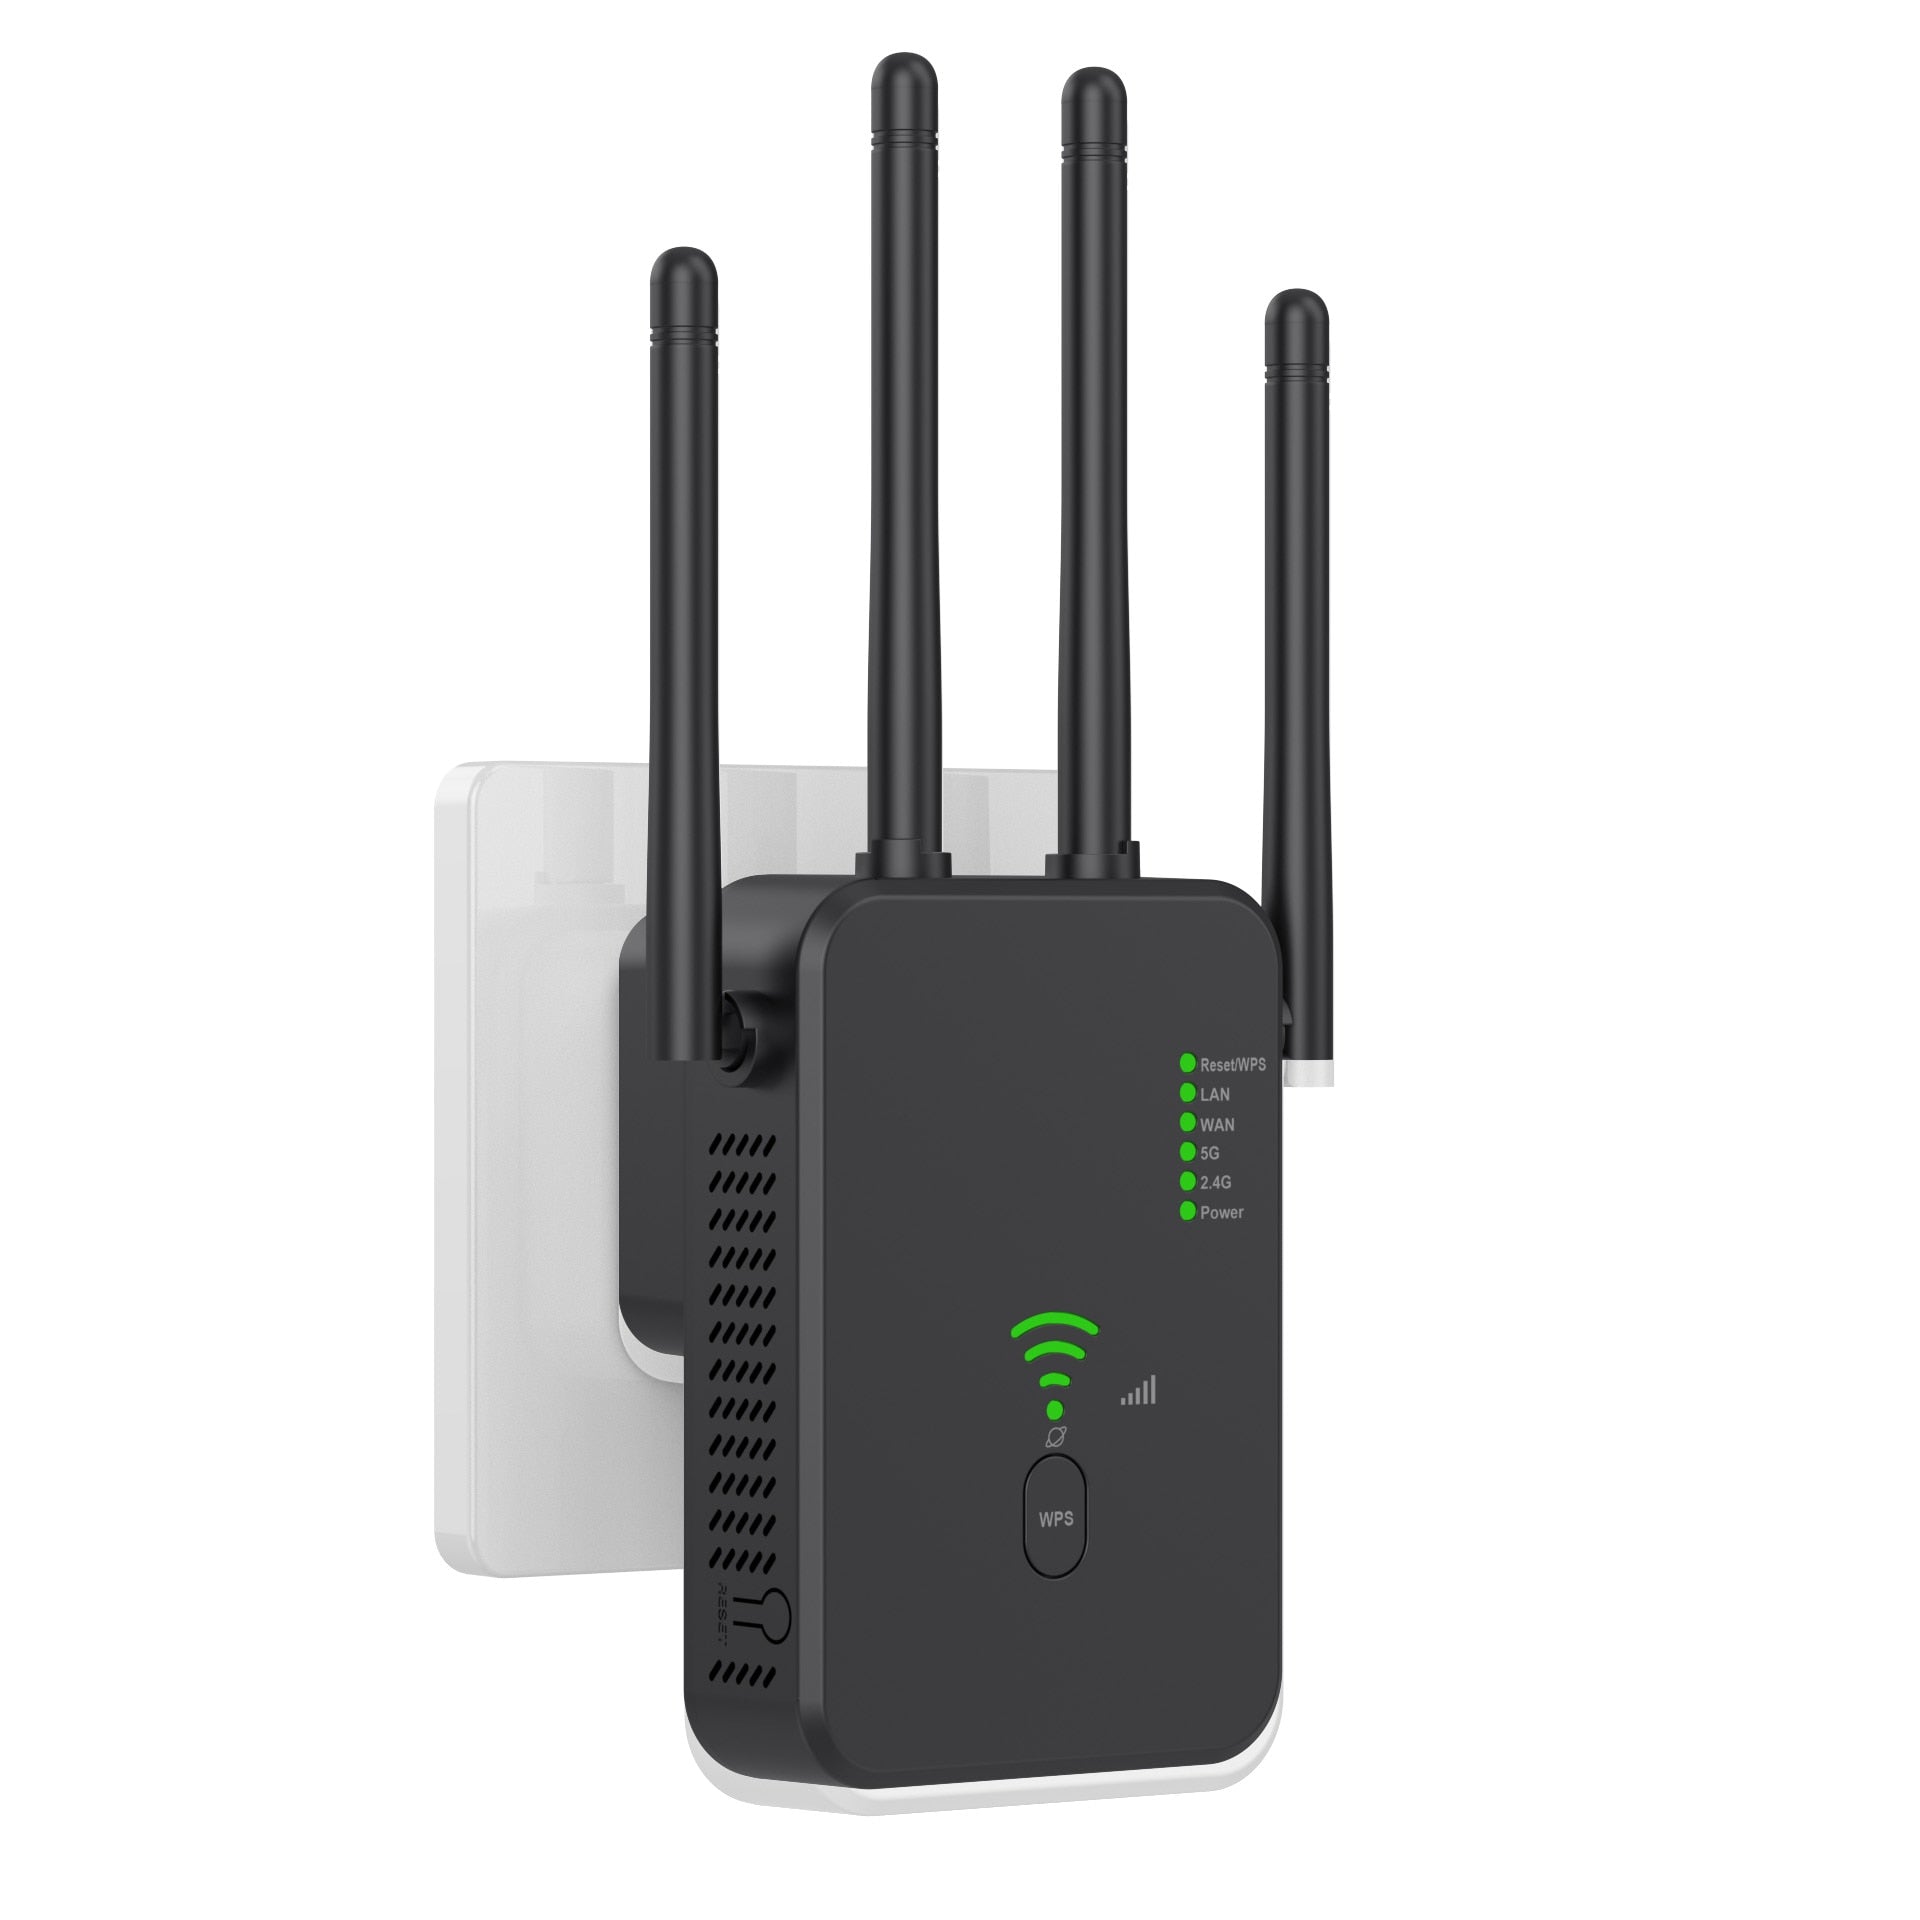 5Ghz Wireless WiFi Repeater 1200Mbps Router Wifi Booster 2.4G Long Range Extender 5G Wi-Fi Signal Amplifier Repeater Black/White